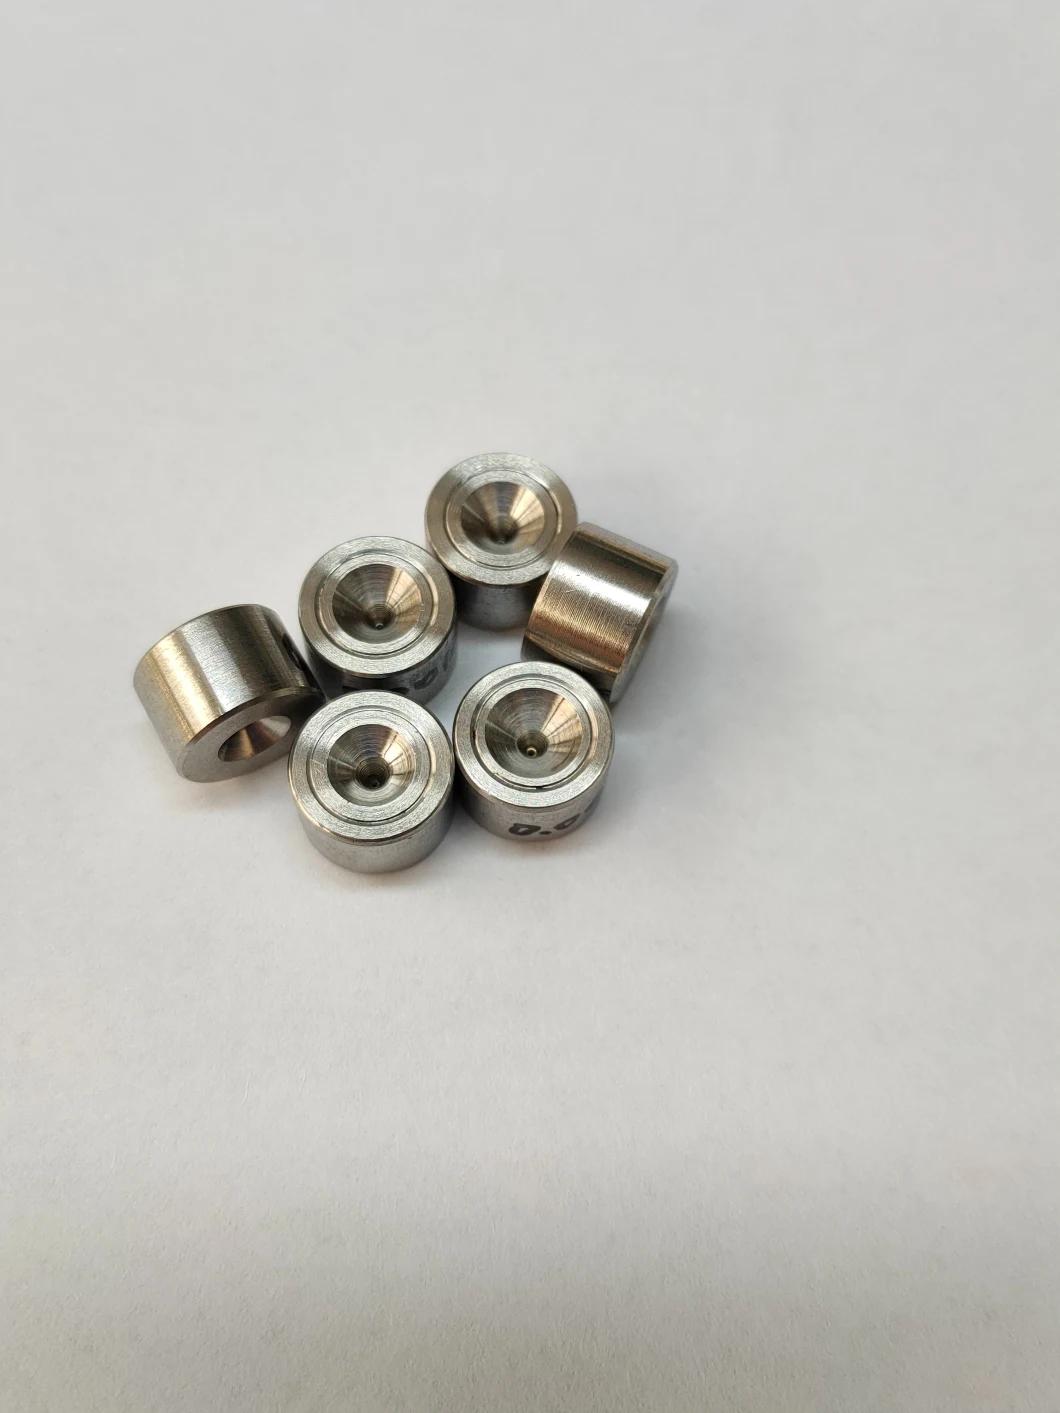 Qualified Natural Diamond Dies with Tiny Case 9.525X6.35 (mm)